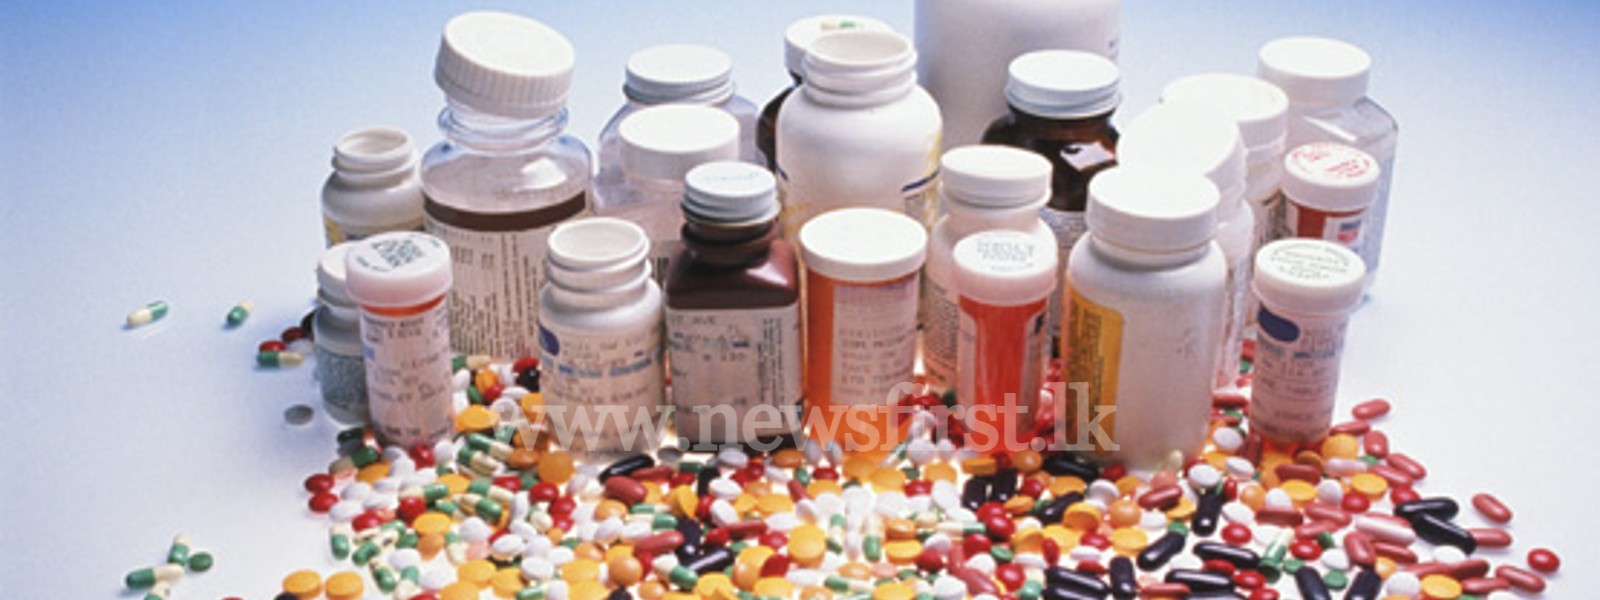 Dollar crisis to lead to pharmaceutical crisis?; Industry urges immediate solutions